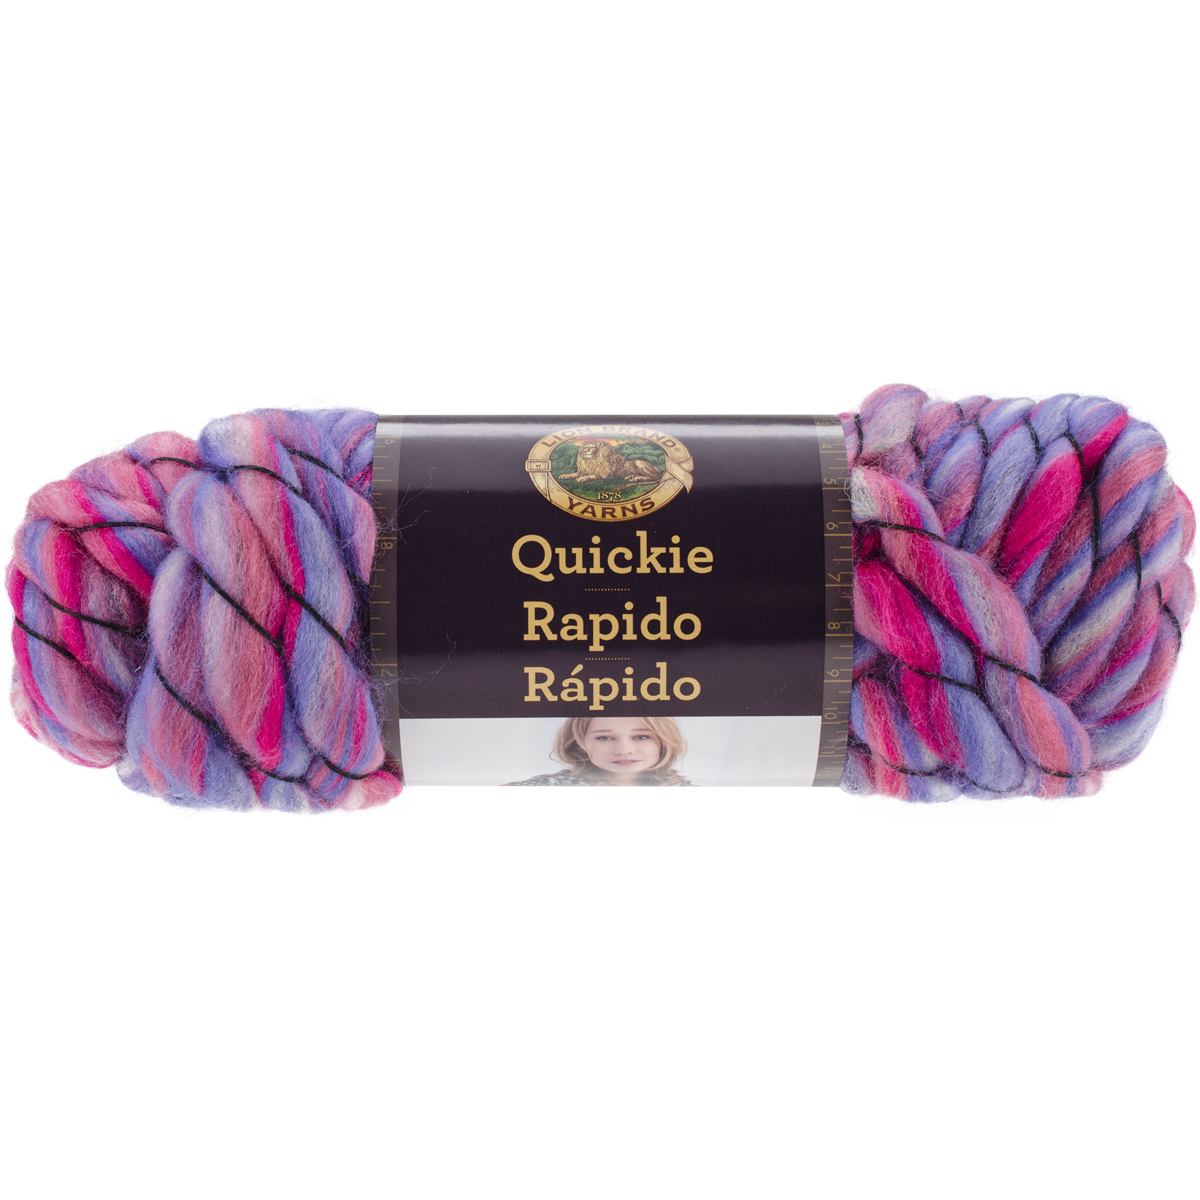 Quickie Yarn-Fruity, Pk 3, Lion Brand - image 1 of 2